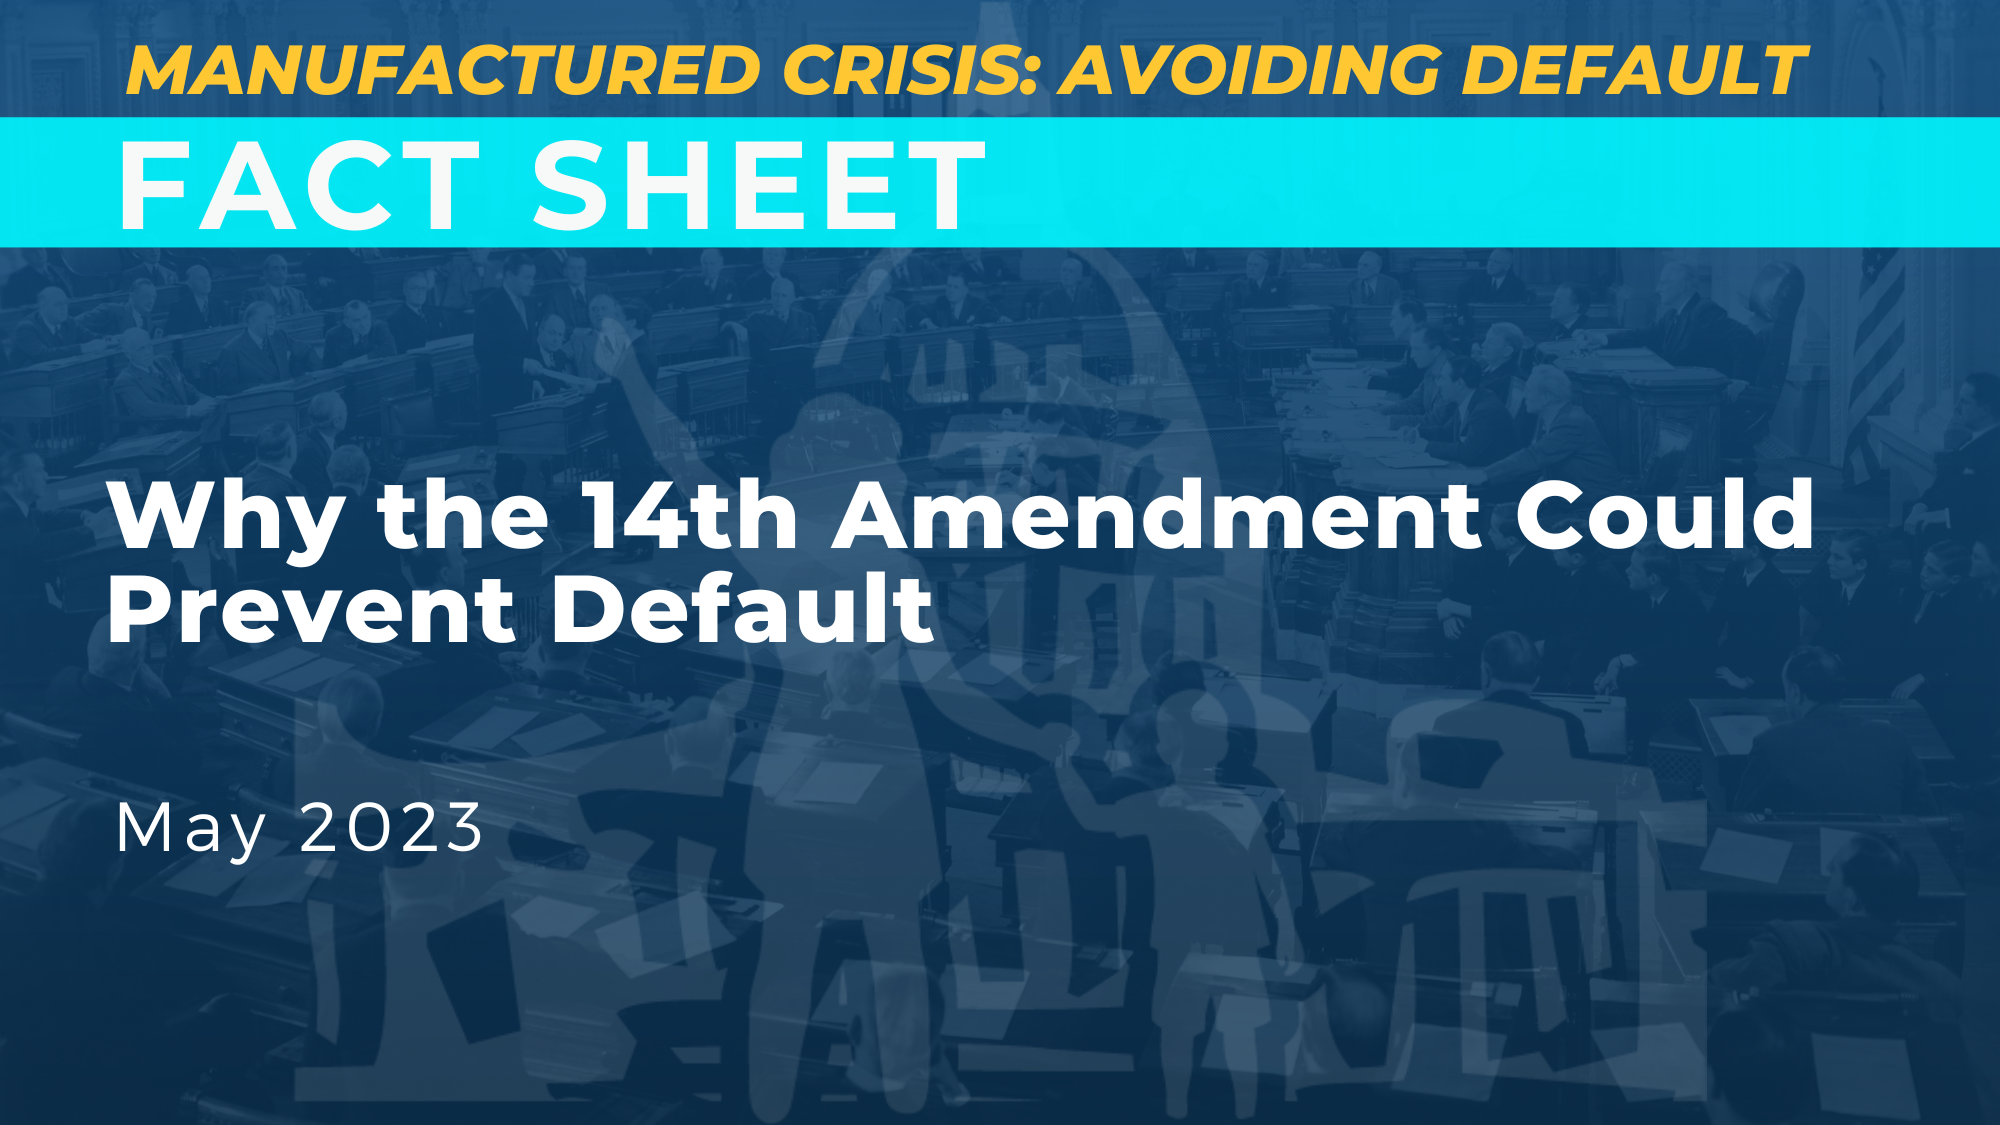 Why the 14th Amendment Could Prevent Default